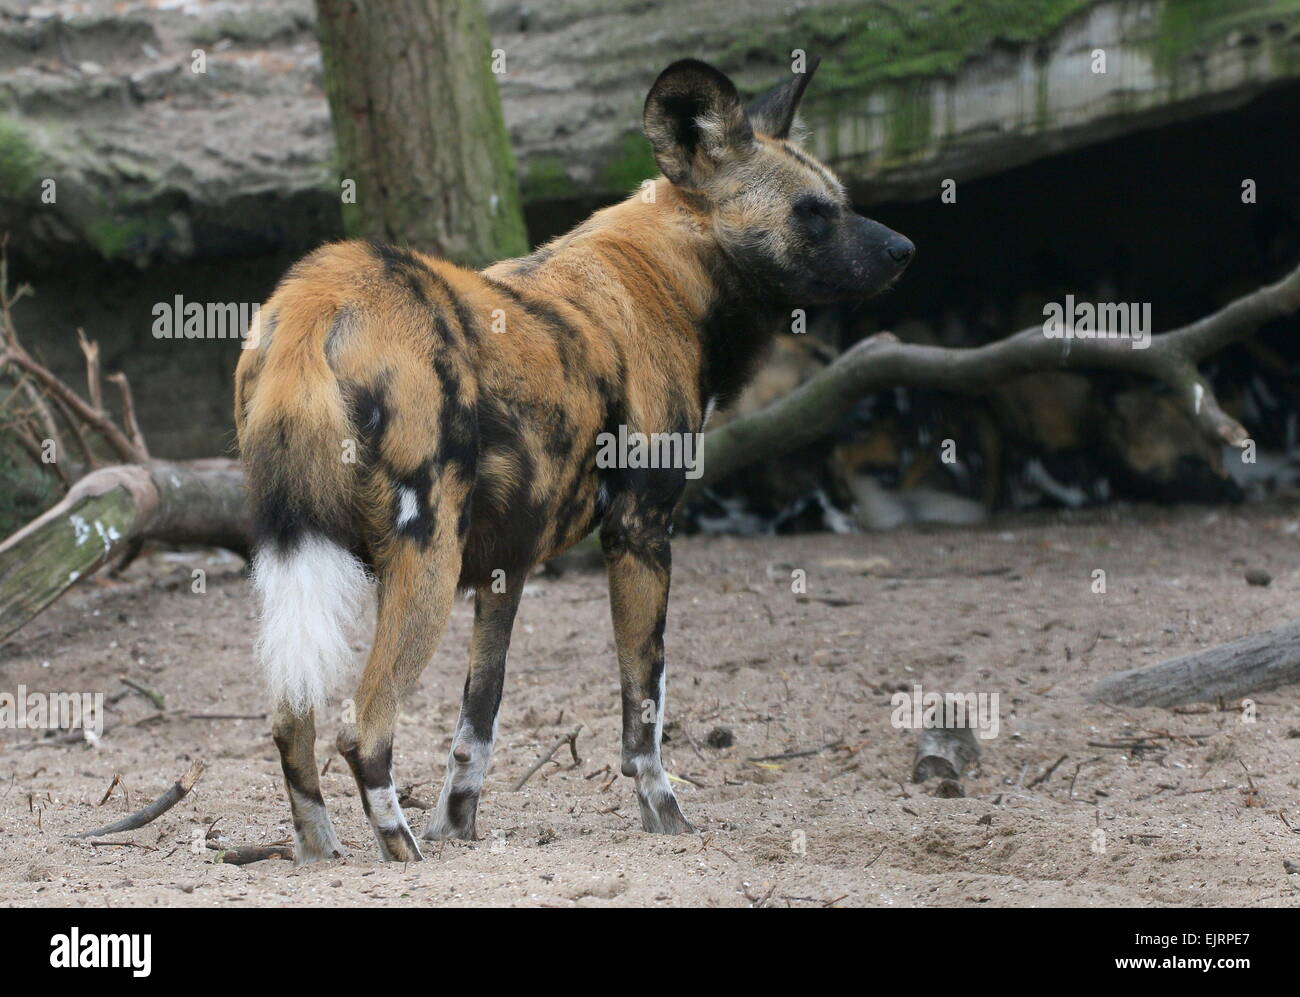 Close-up of an African wild dog (Lycaon pictus), seen in profile Stock Photo